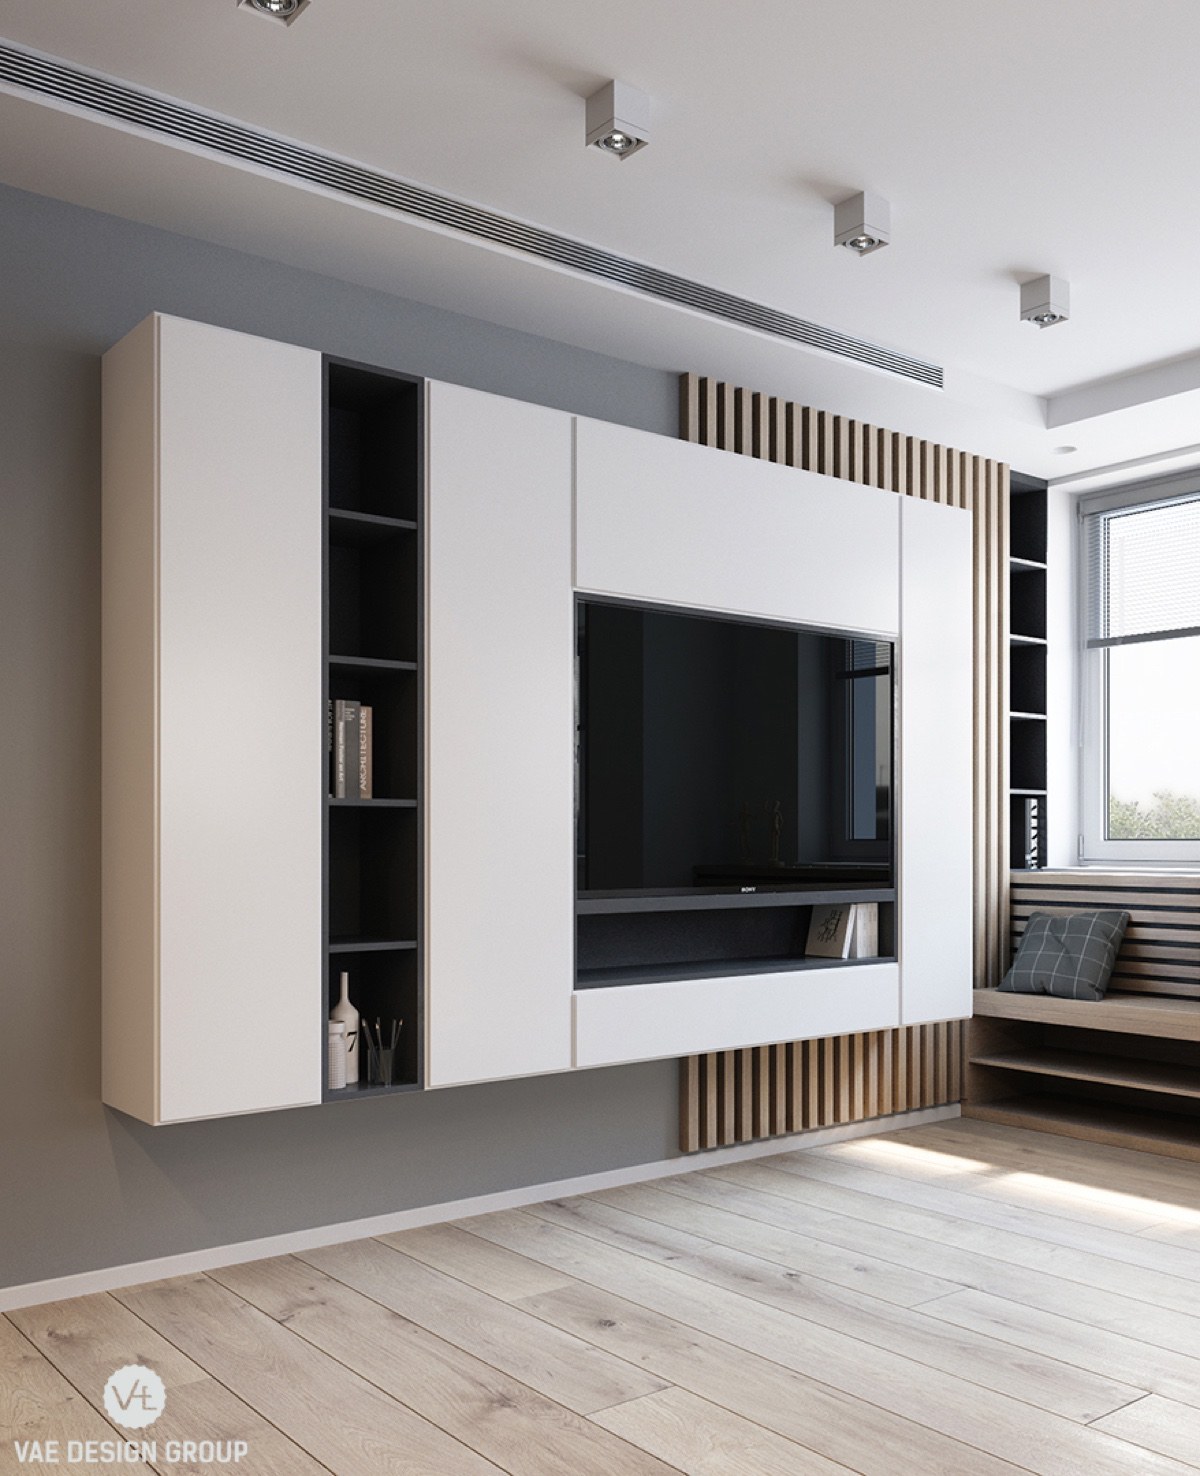 From behind the couch, a monochromatic panel housing TV and entertainment essentials meets the eye. Light wooden flooring, muted grey walls and a lack of clutter help it dominate the space.